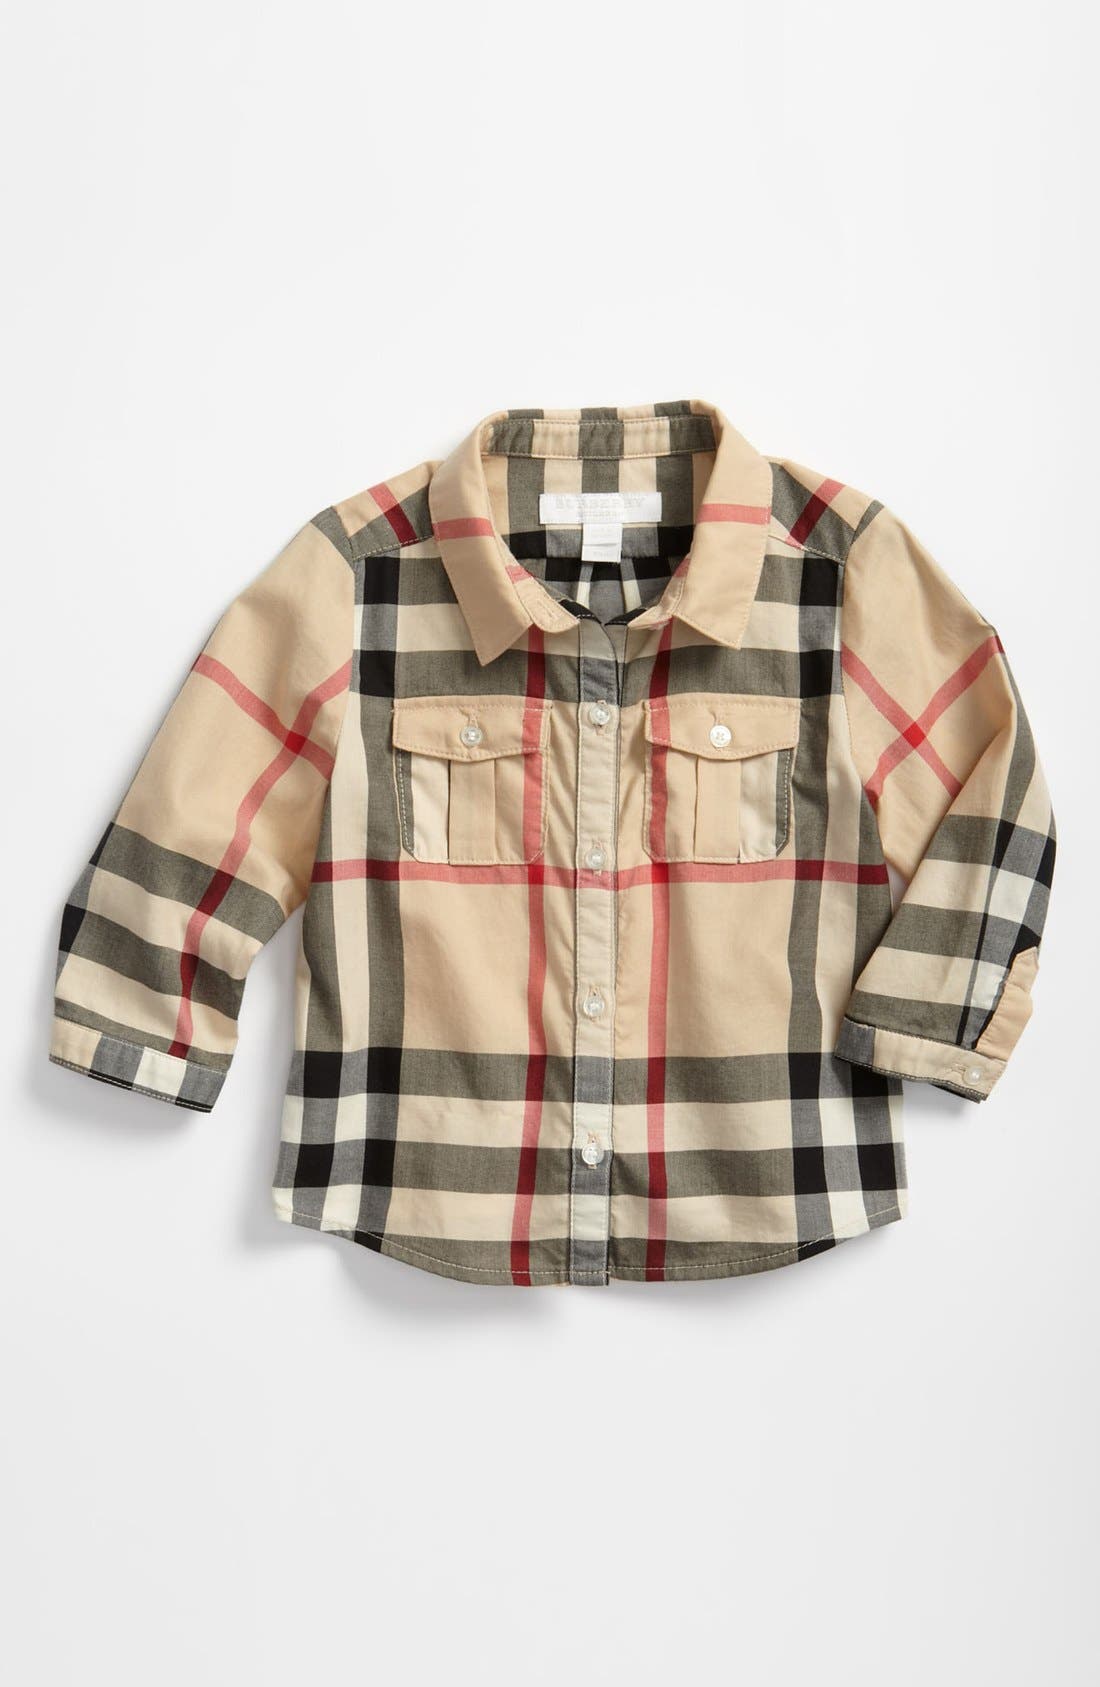 burberry clothes for kids